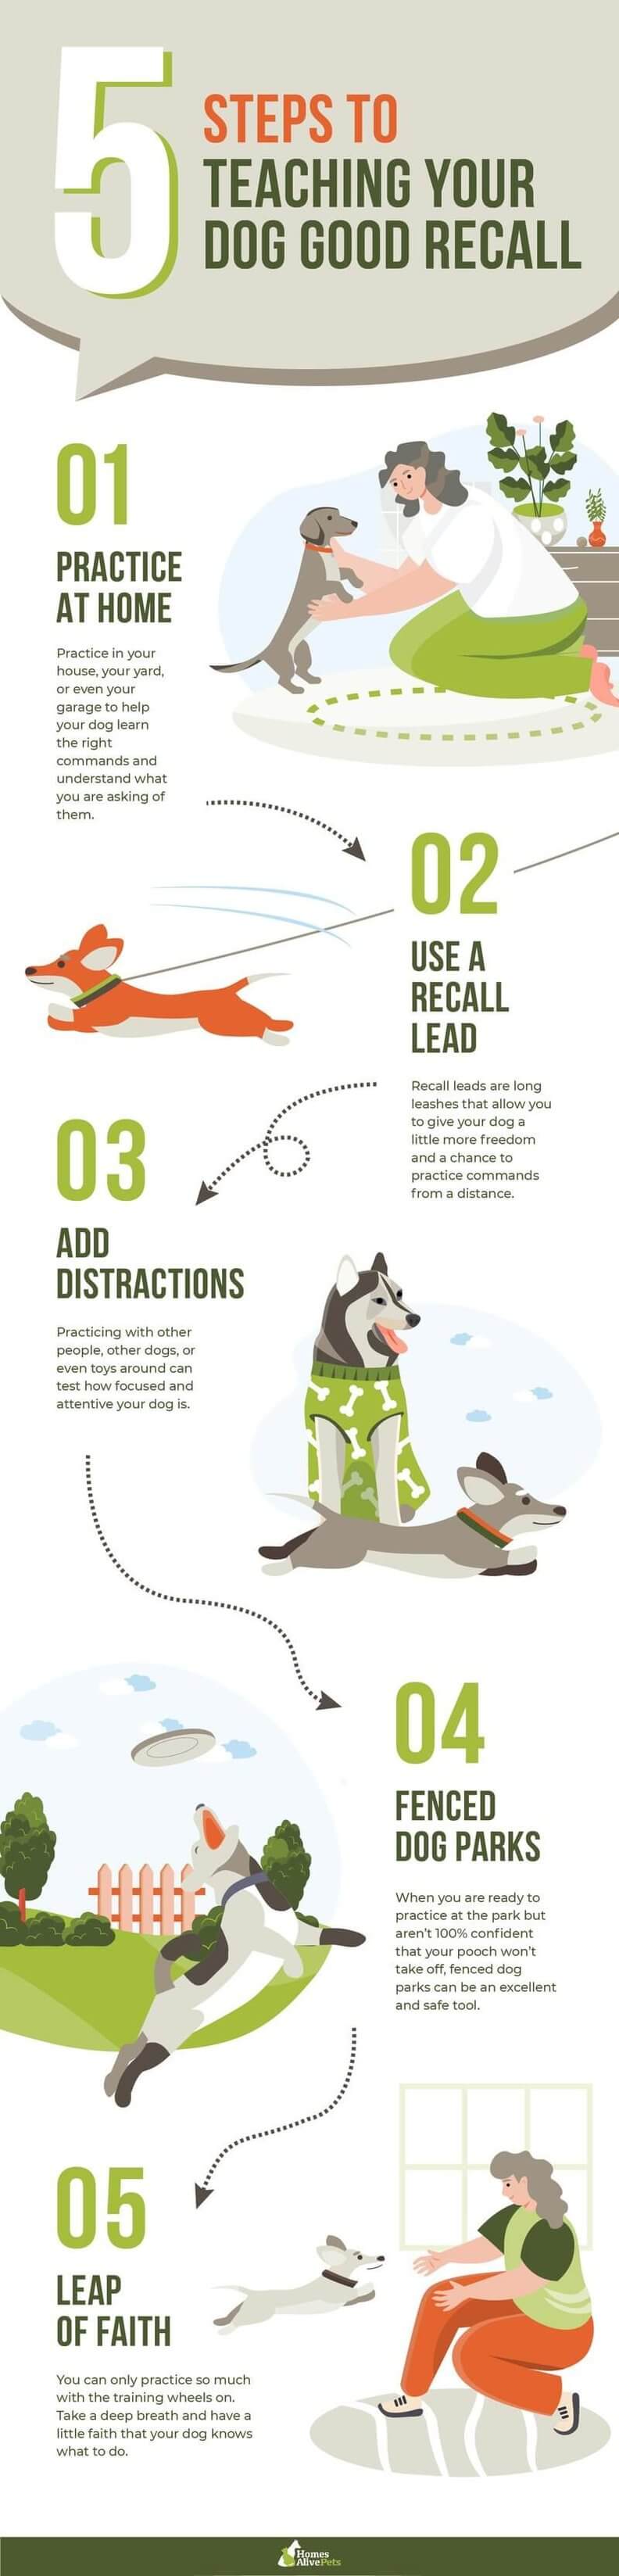 5 Steps to Teaching Your Dog Good Recall - updated_1